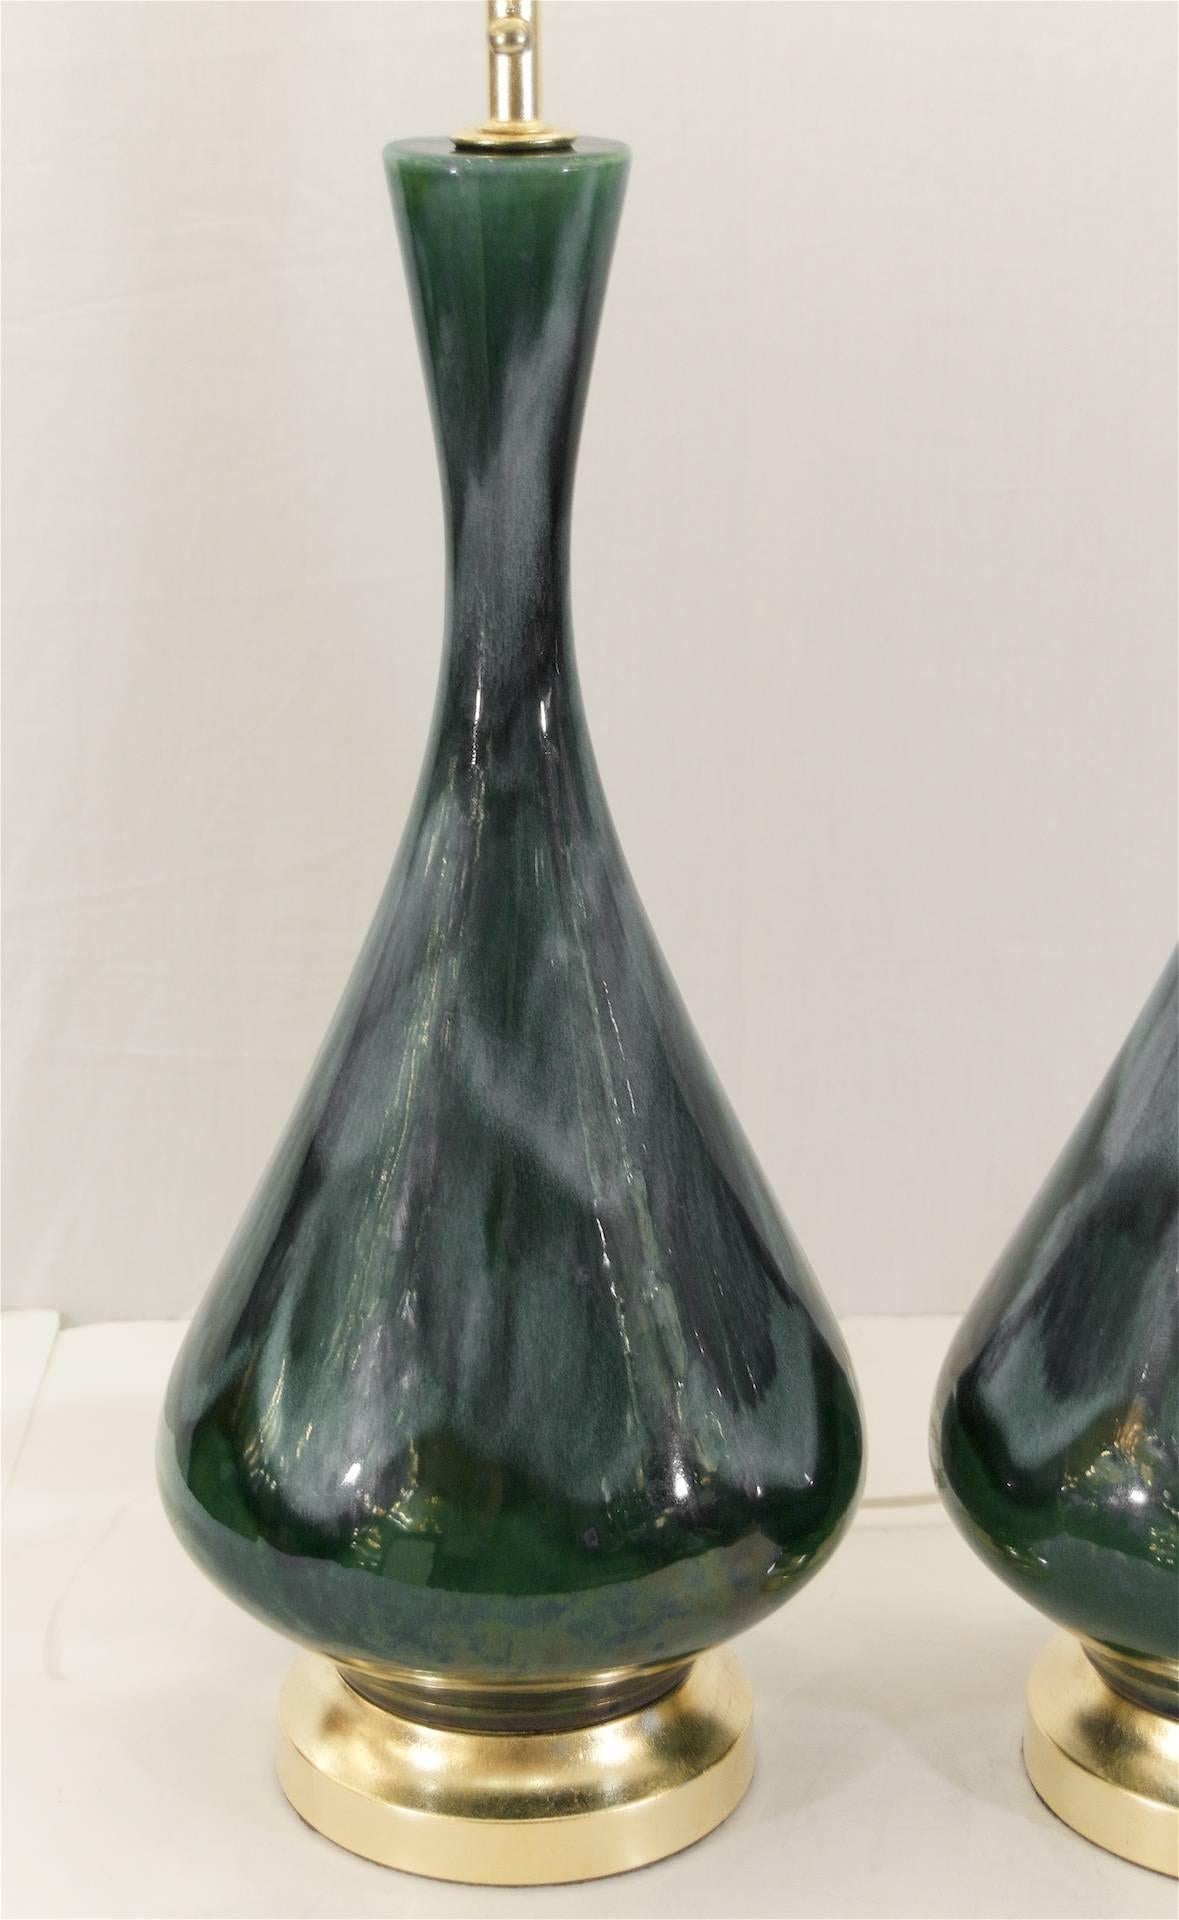 American Royal Haeger Blue and Green Drip Glaze Lamps with Gilt Hardware